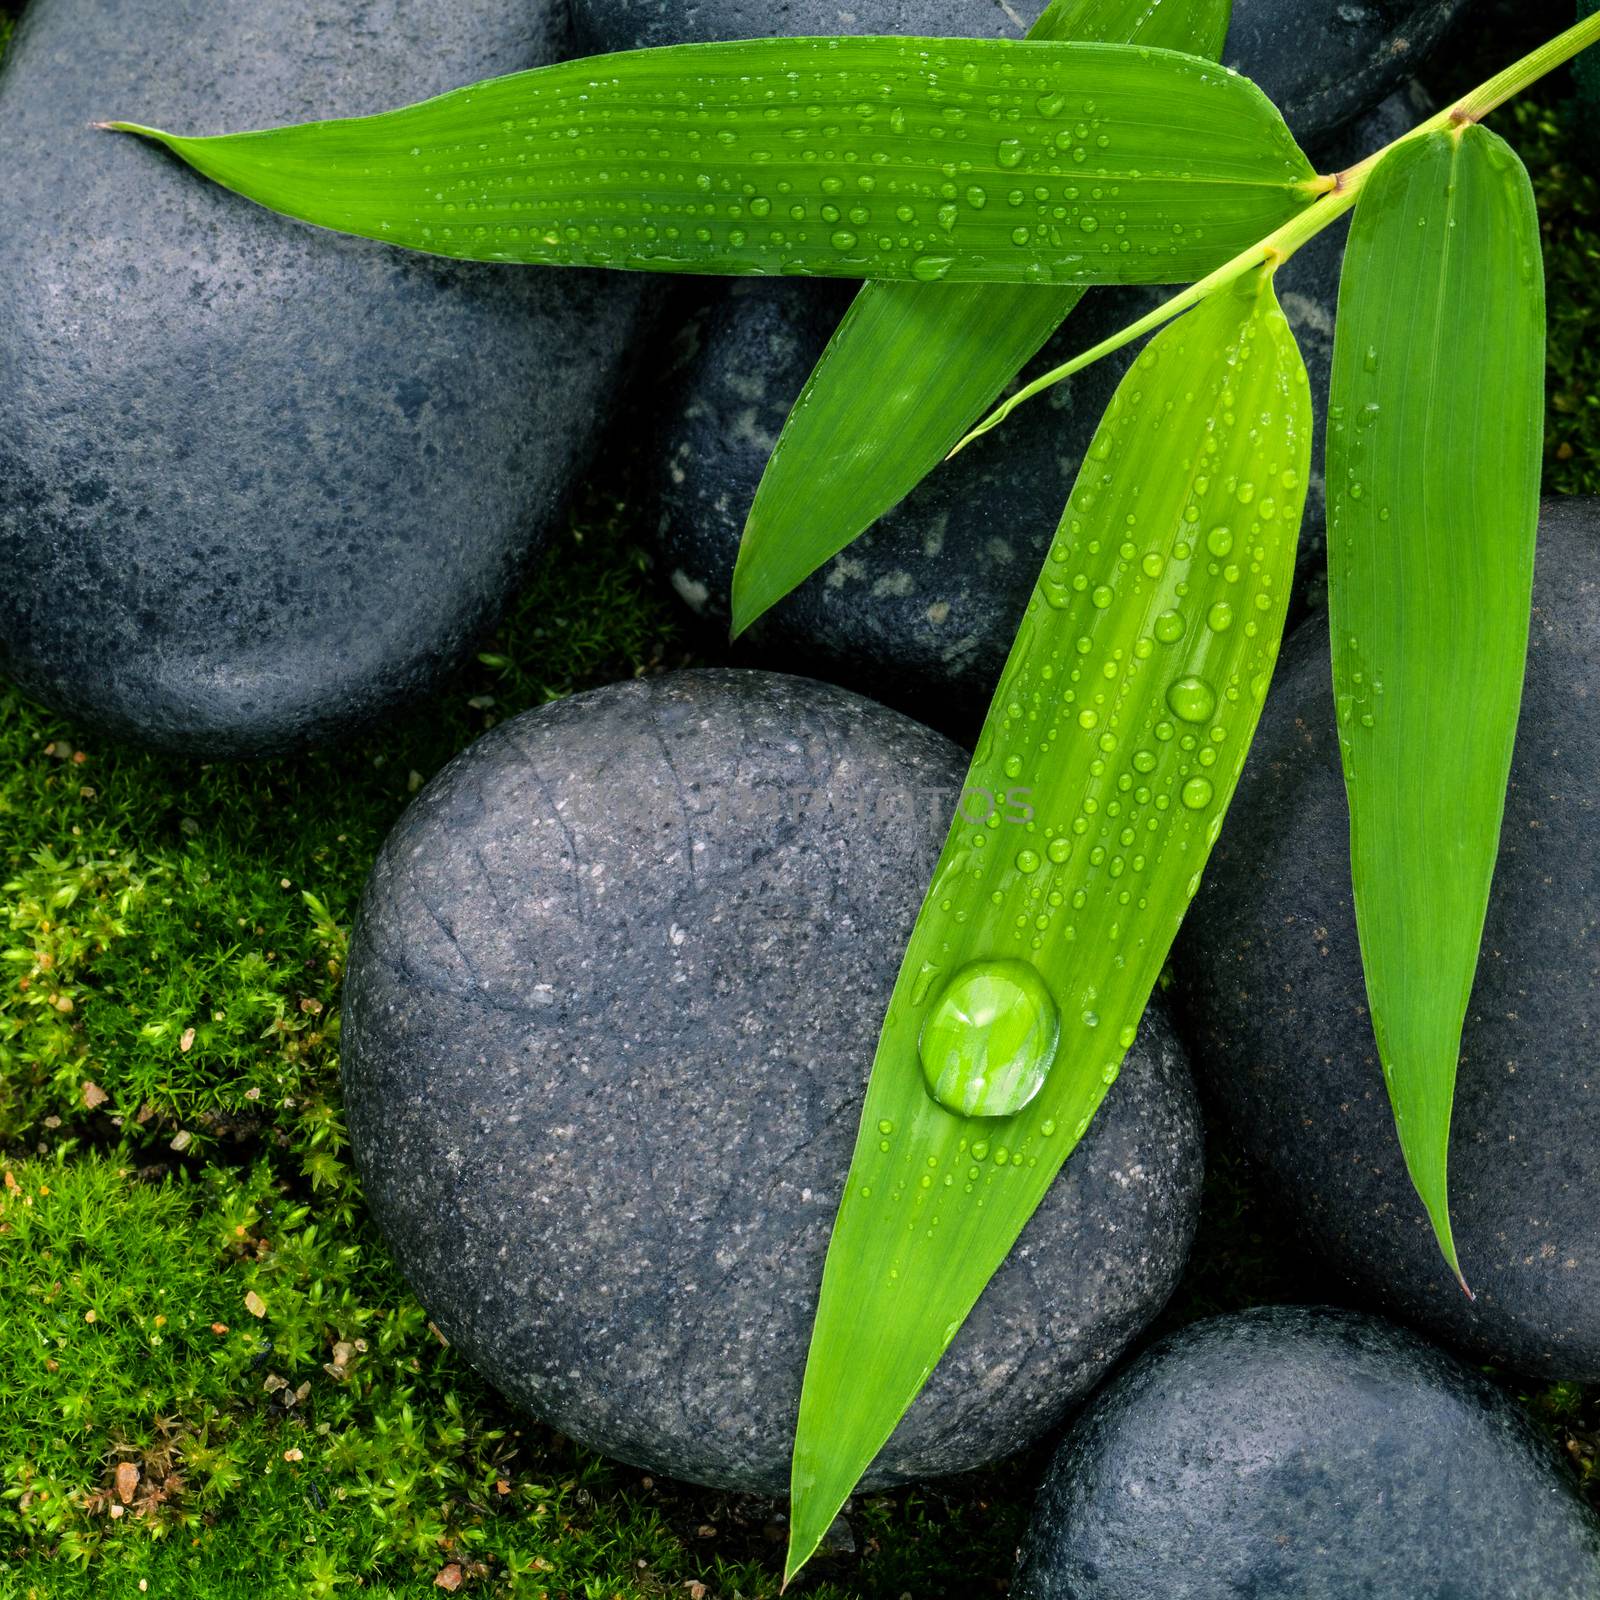 The River Stones spa treatment scene and bamboo leaves with raindrop zen like concepts.